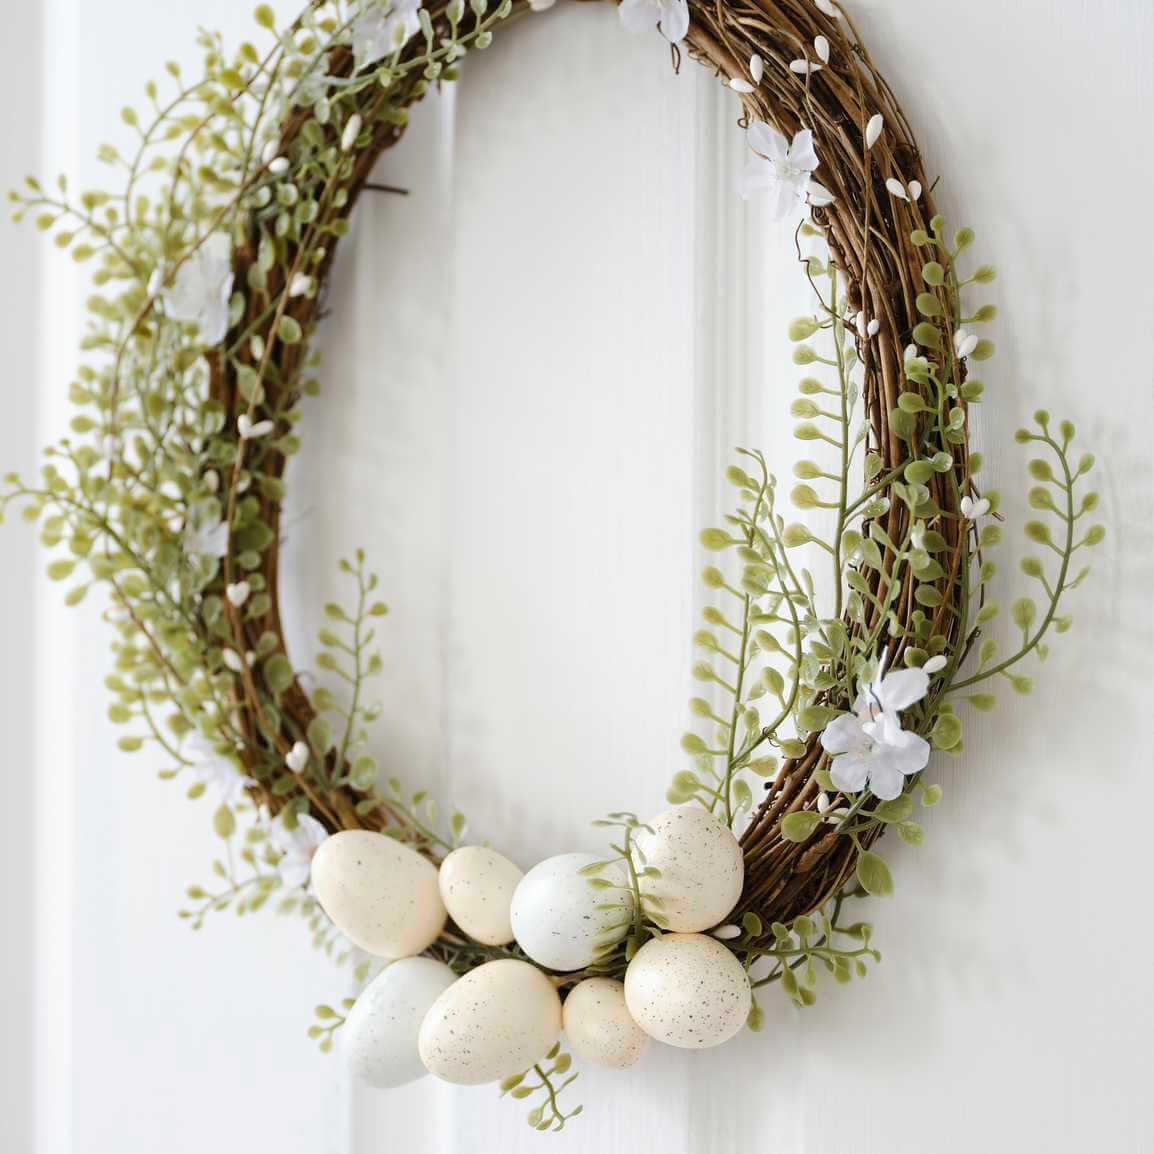 Egg, Foliage and Twig Easter Wreath